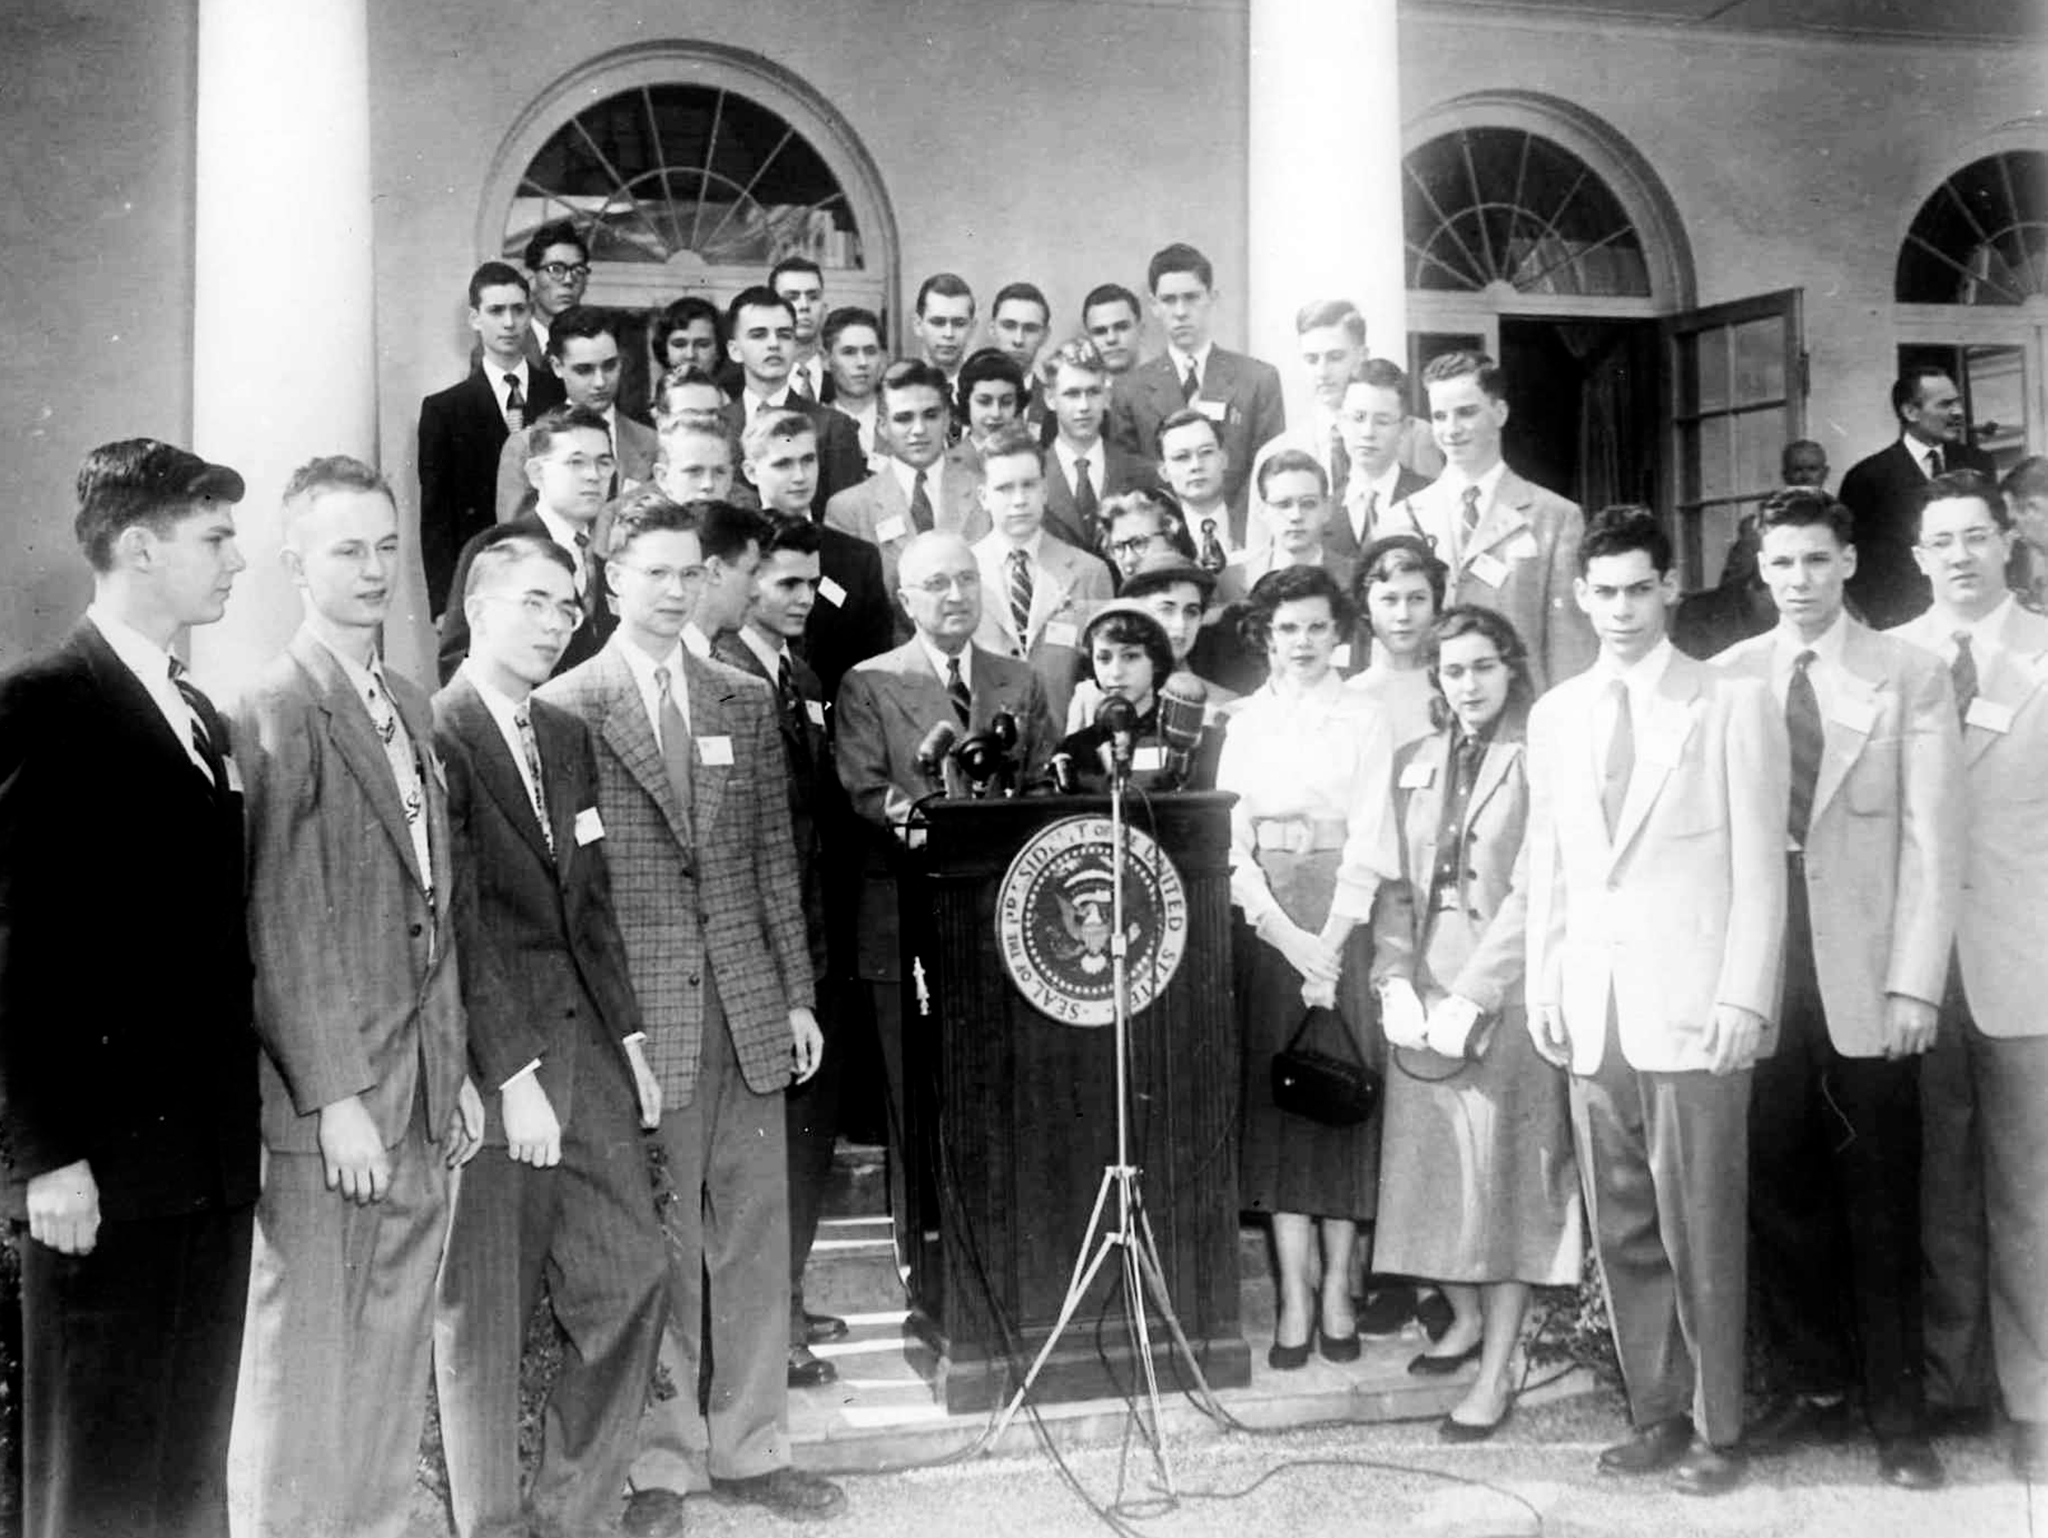 STS finalists meet with President Truman on the White House lawn 